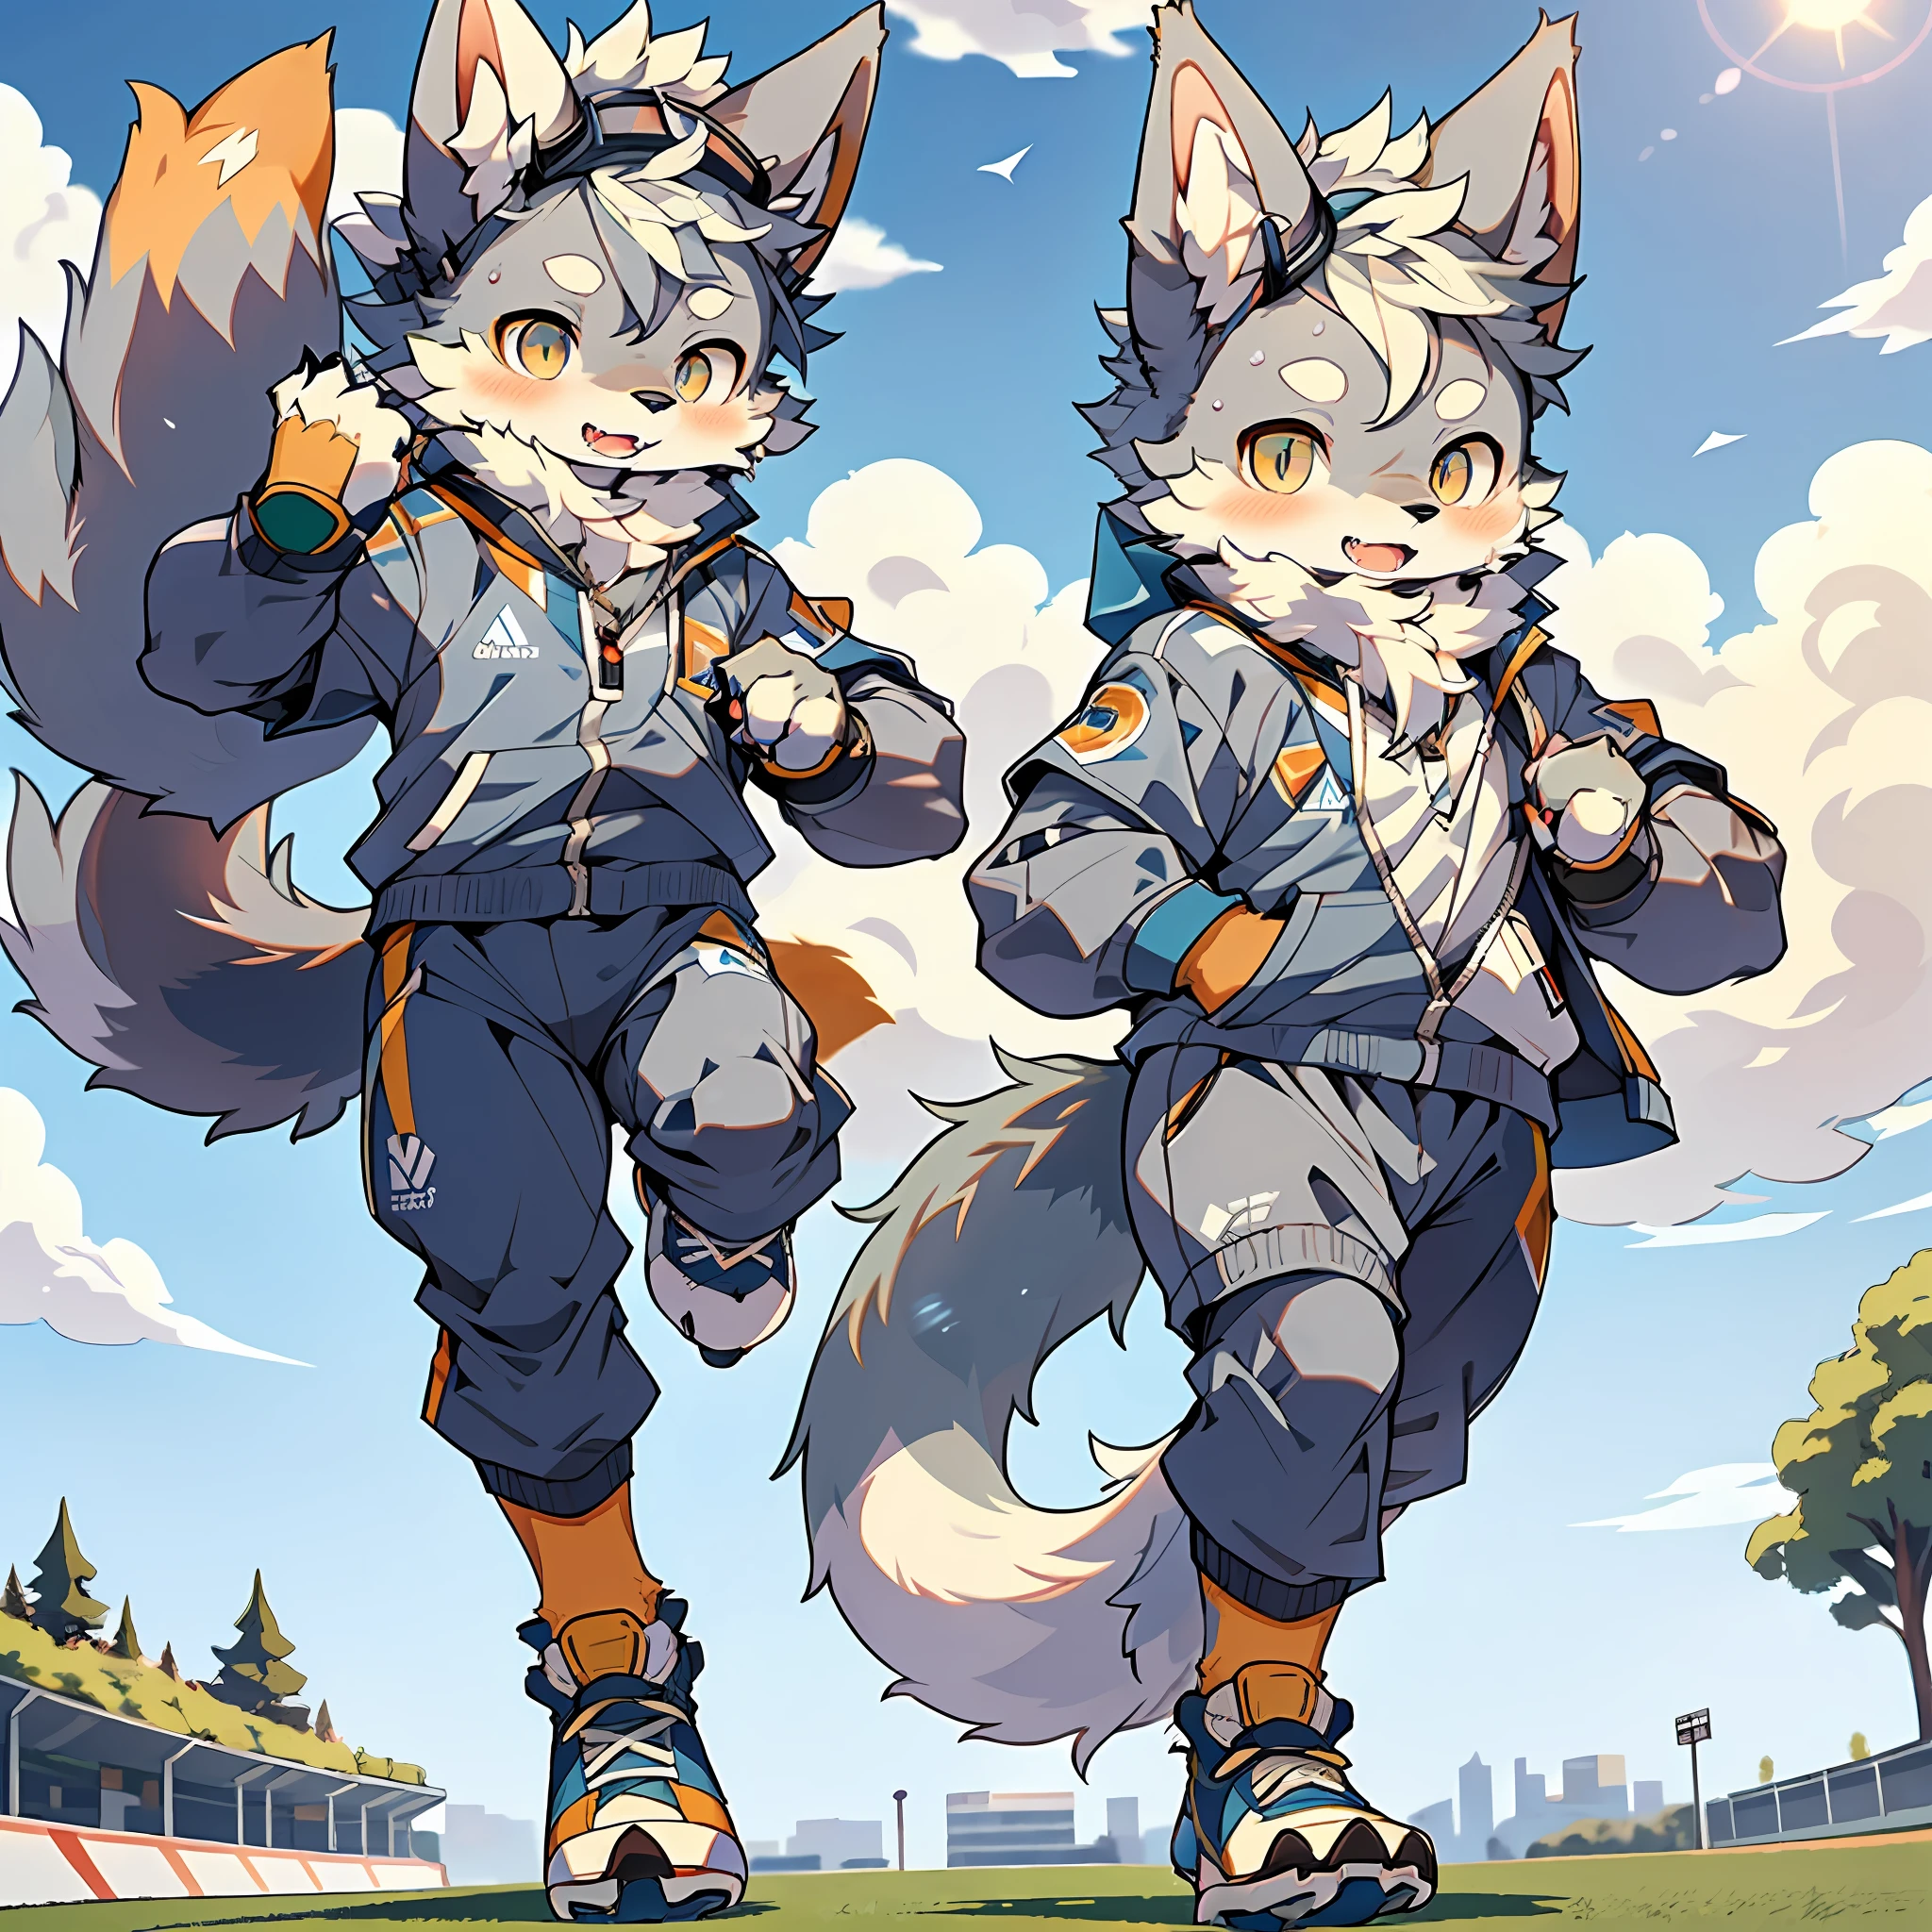 (Best Quality), (Masterpiece), ((Solitary), (Ultra Detailed), (Furry), Full Body Furry, Furry, (Male Arctic Fox: 1.5), (Gray Skin: 1.3), (Fluffy Tail: 1.2), Character Focus, (Golden Eyes), (Canine Paws), (Gray Ears), Sharp Focus, (Furry of Animal Ears), (Sports), ((Wearing a Soccer Suit)), (Playing Soccer))), ((Running)), (Dribble), Sweating, On the football field, detailed background, sunny sky, blue sky and white clouds